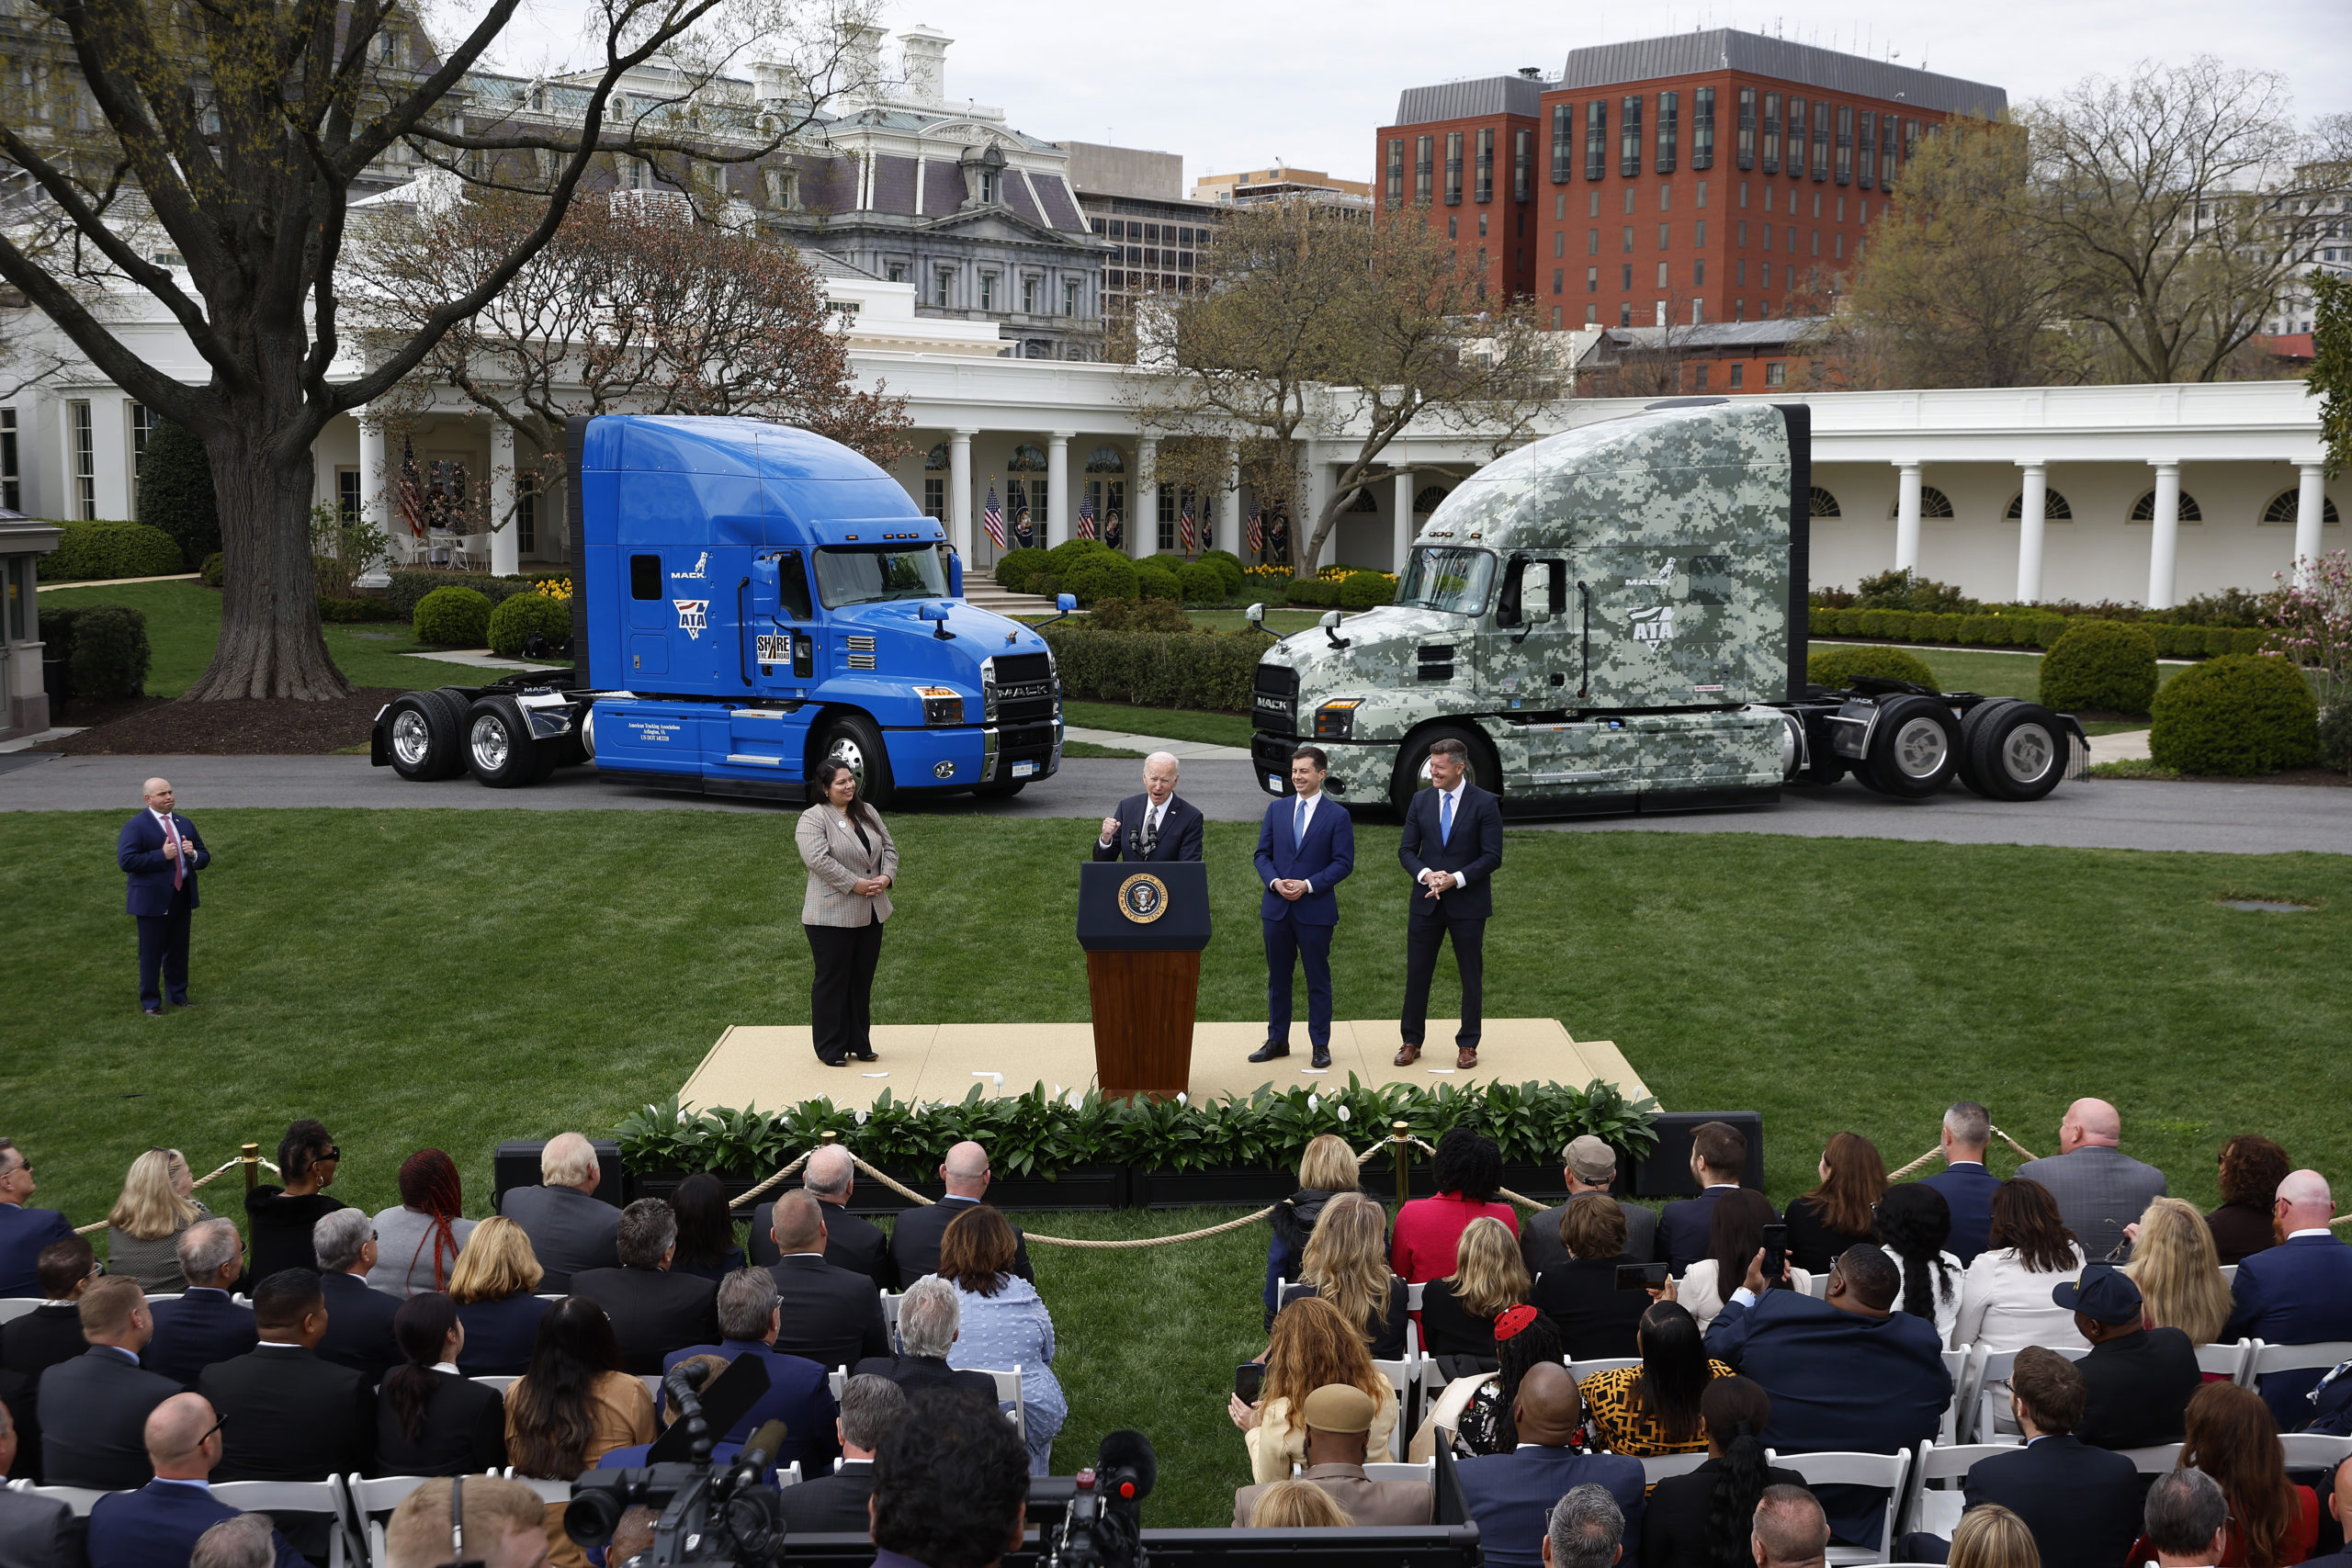 President Joe Biden (C) delivers remarks on his 'Trucking Action Plan' with apprentice truck driver Maria Rodriguez, Transportation Secretary Pete Buttigieg and Veterans Trucking Task Force Chair Patrick Murphy on the South Lawn of the White House on April 04, 2022 in Washington, DC. (Photo by Chip Somodevilla/Getty Images)